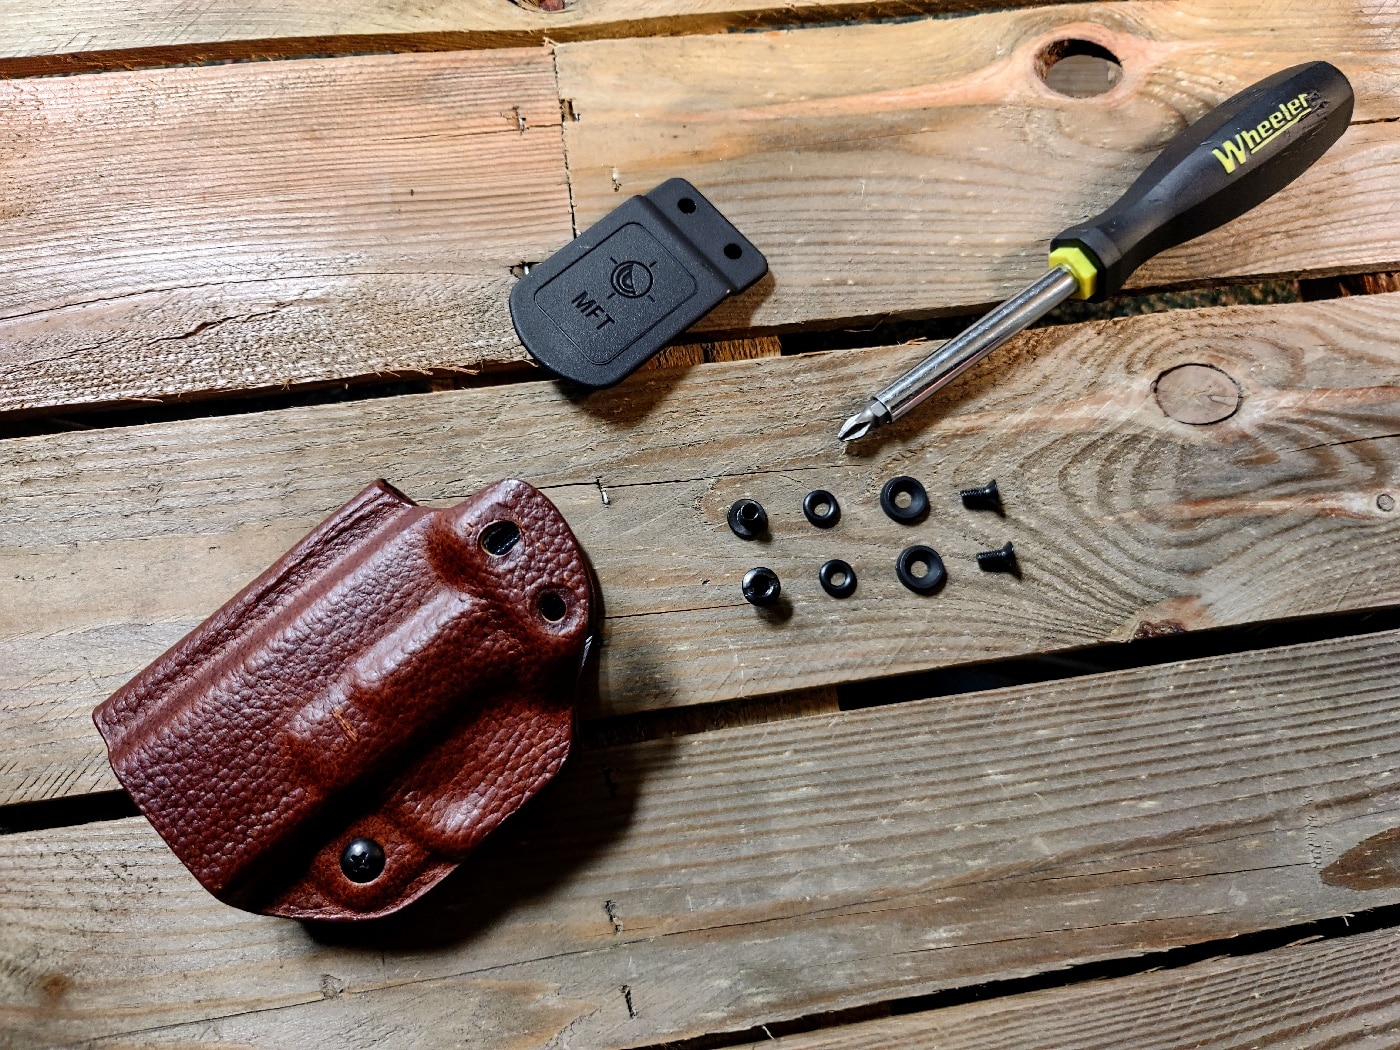 Shown here is the holster being adjusted by the author with a screwdriver. The Mission First Tactical holster can be adjusted by the user so that it can be used as OWB, AIWB or IWB - plus it can be used on the right or left side of the body.